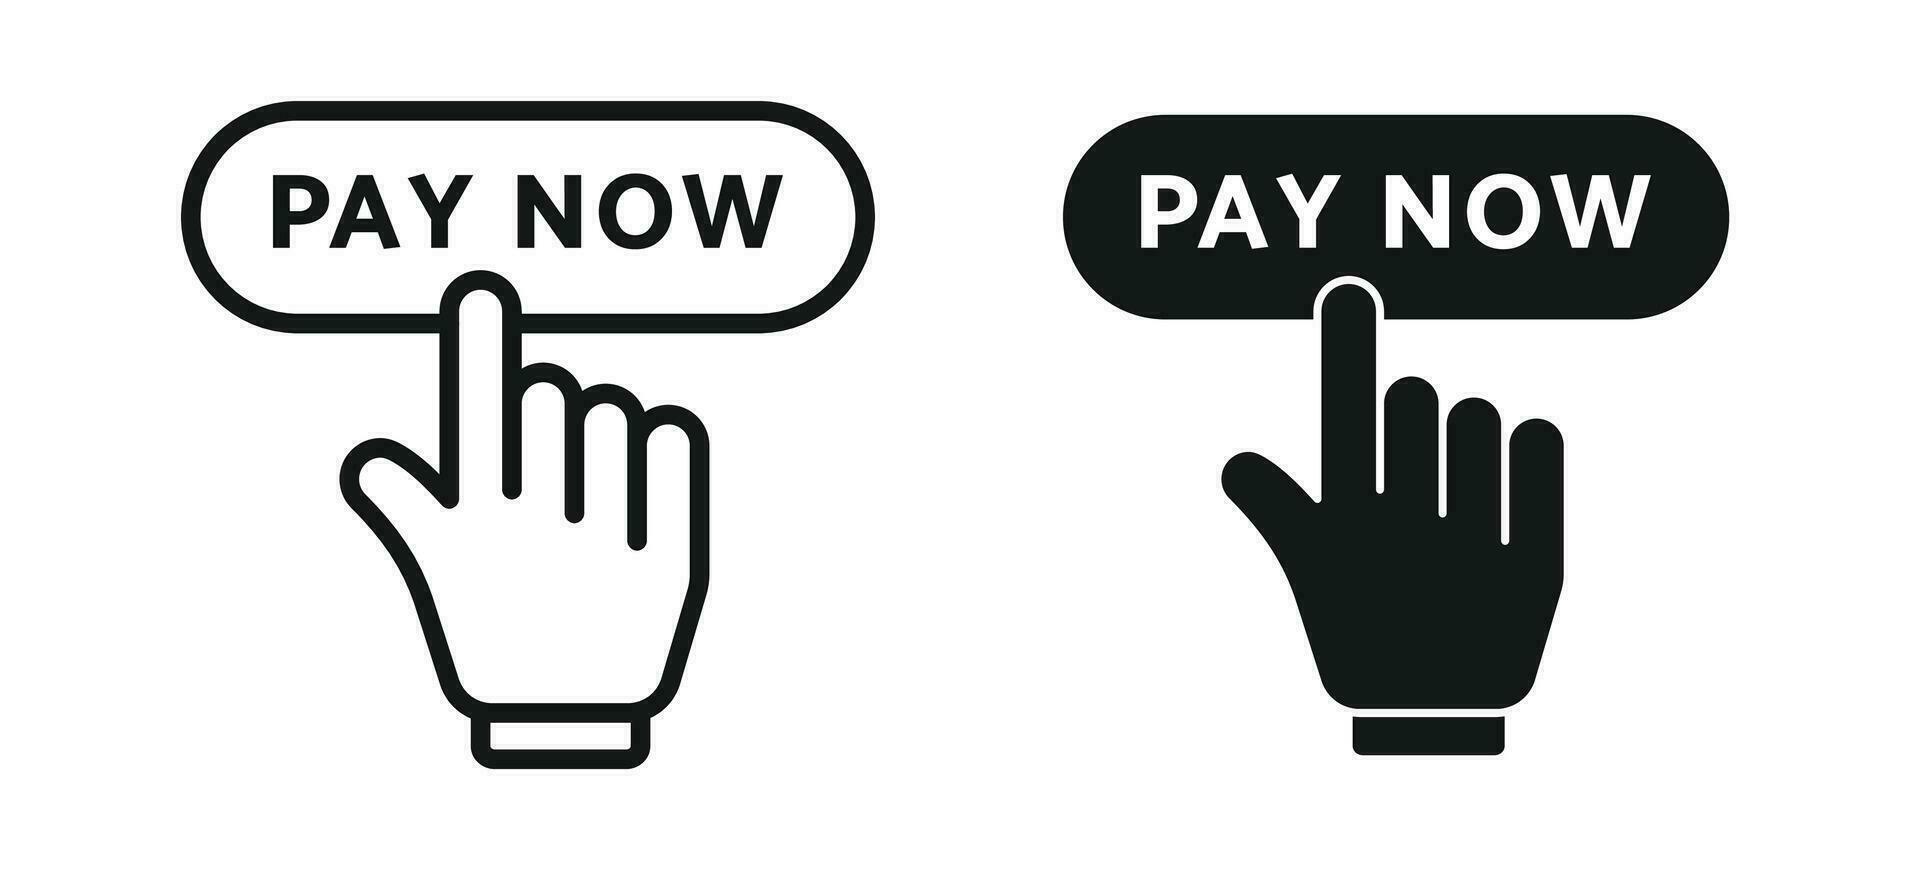 Pay now Button icon set in black filled and outlined style. click here and pay bill cta buttons. vector